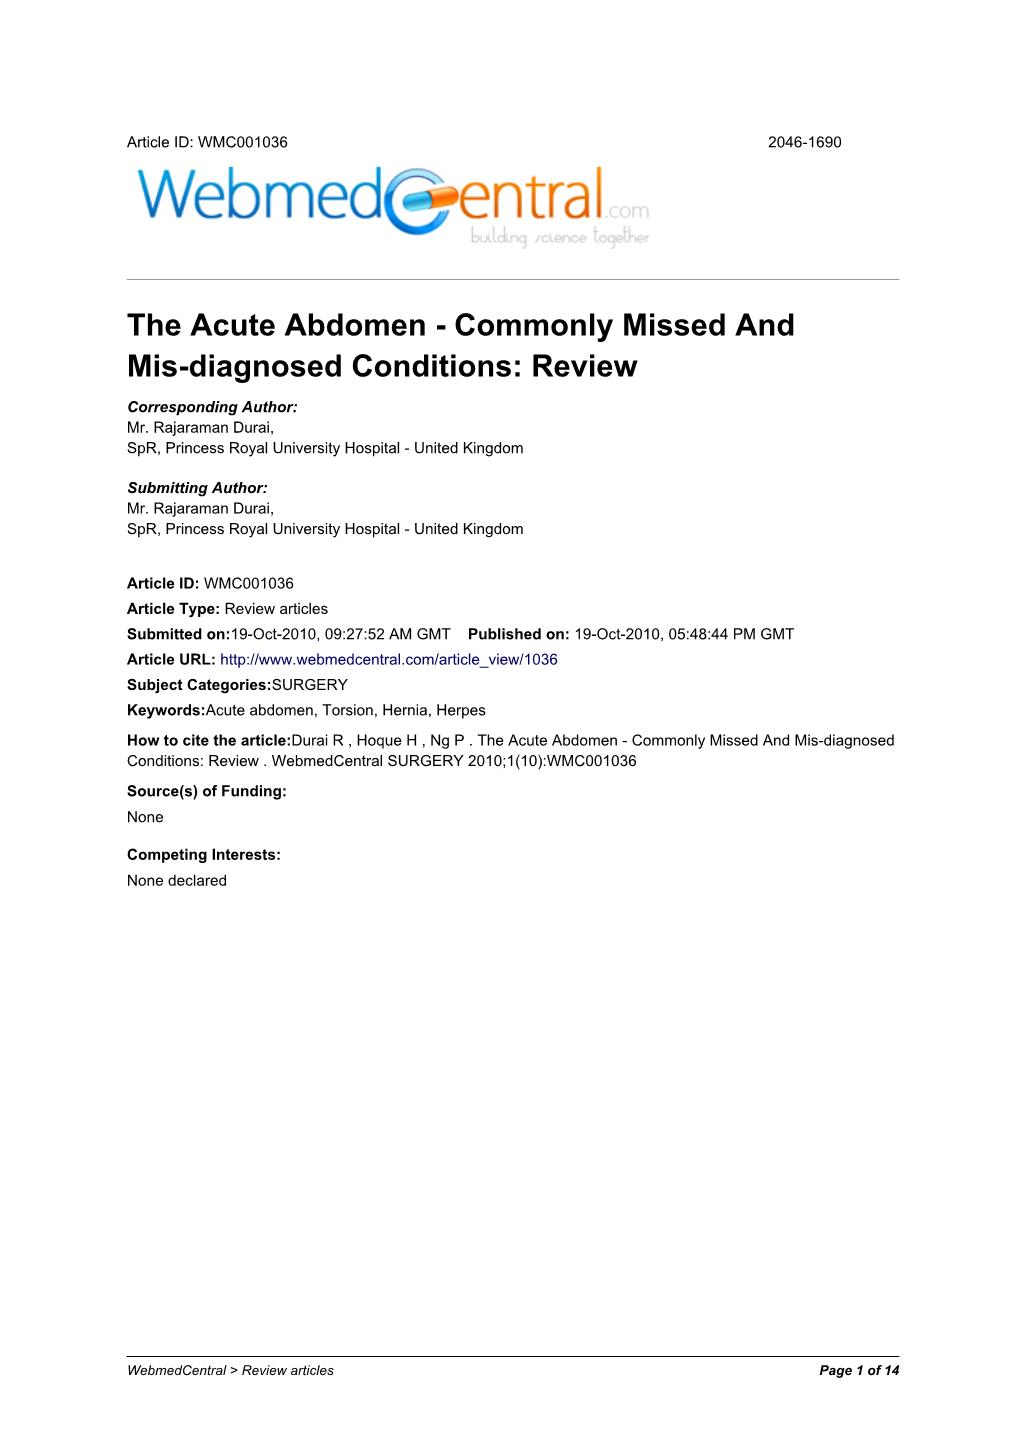 The Acute Abdomen - Commonly Missed and Mis-Diagnosed Conditions: Review